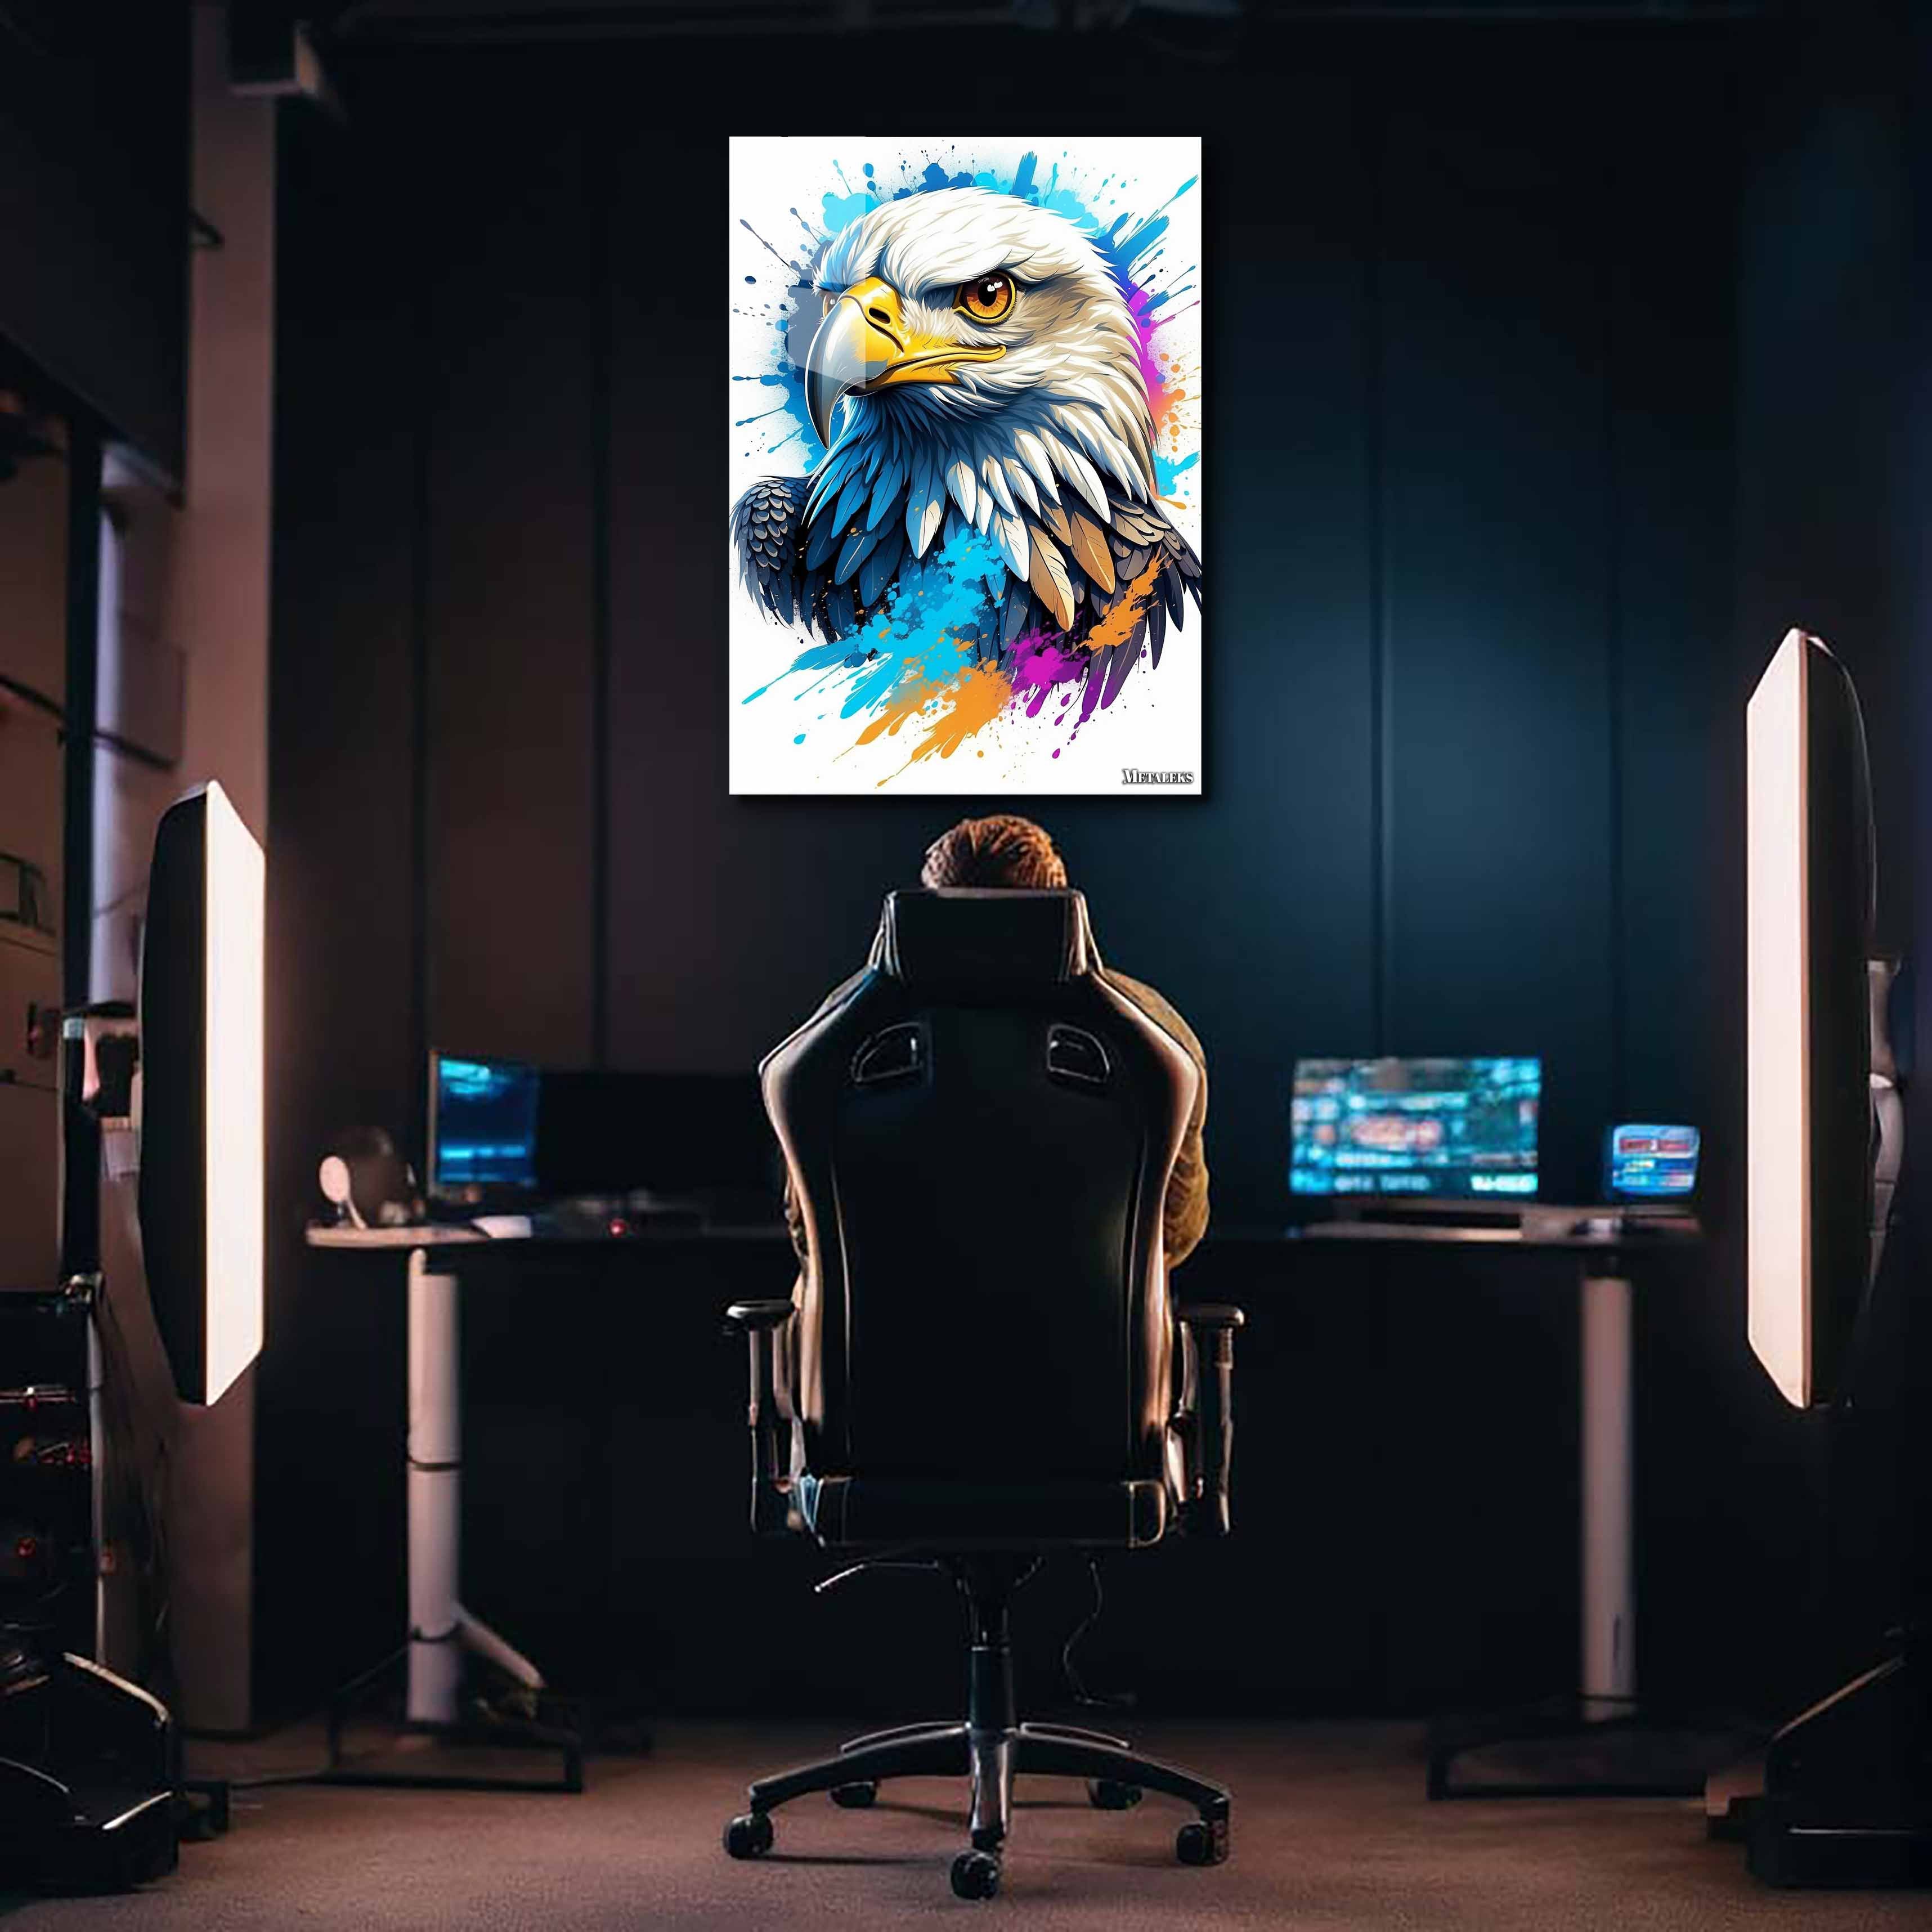 Majestic Soar: Portrait of a Noble Eagle-designed by @maximise